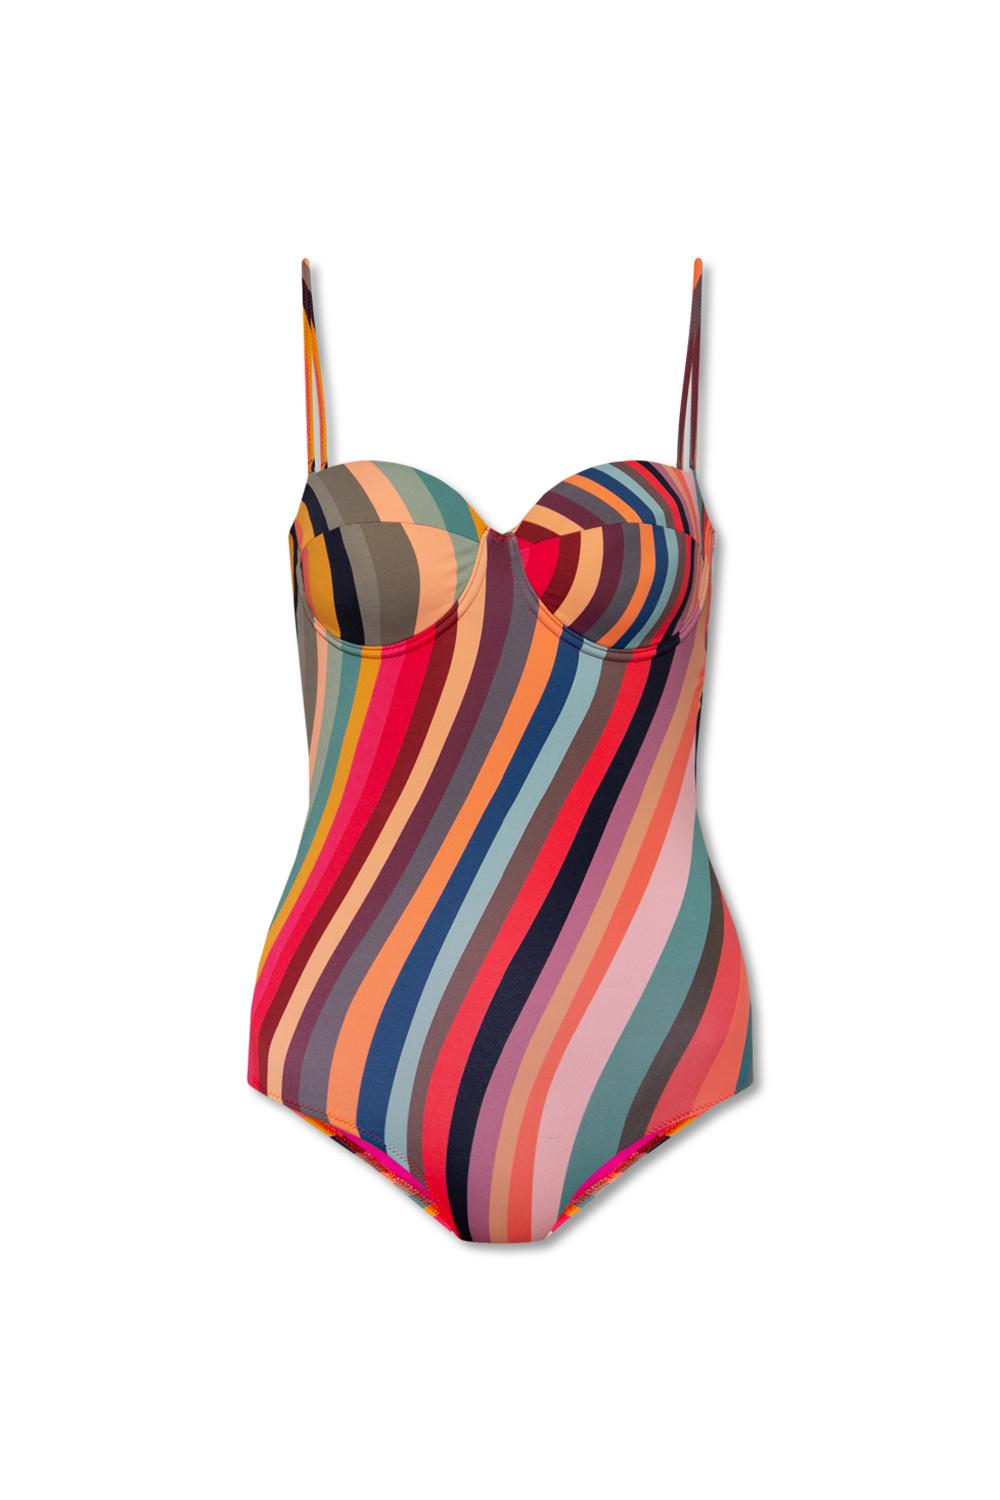 Paul Smith One-piece Swimsuit in Red | Lyst